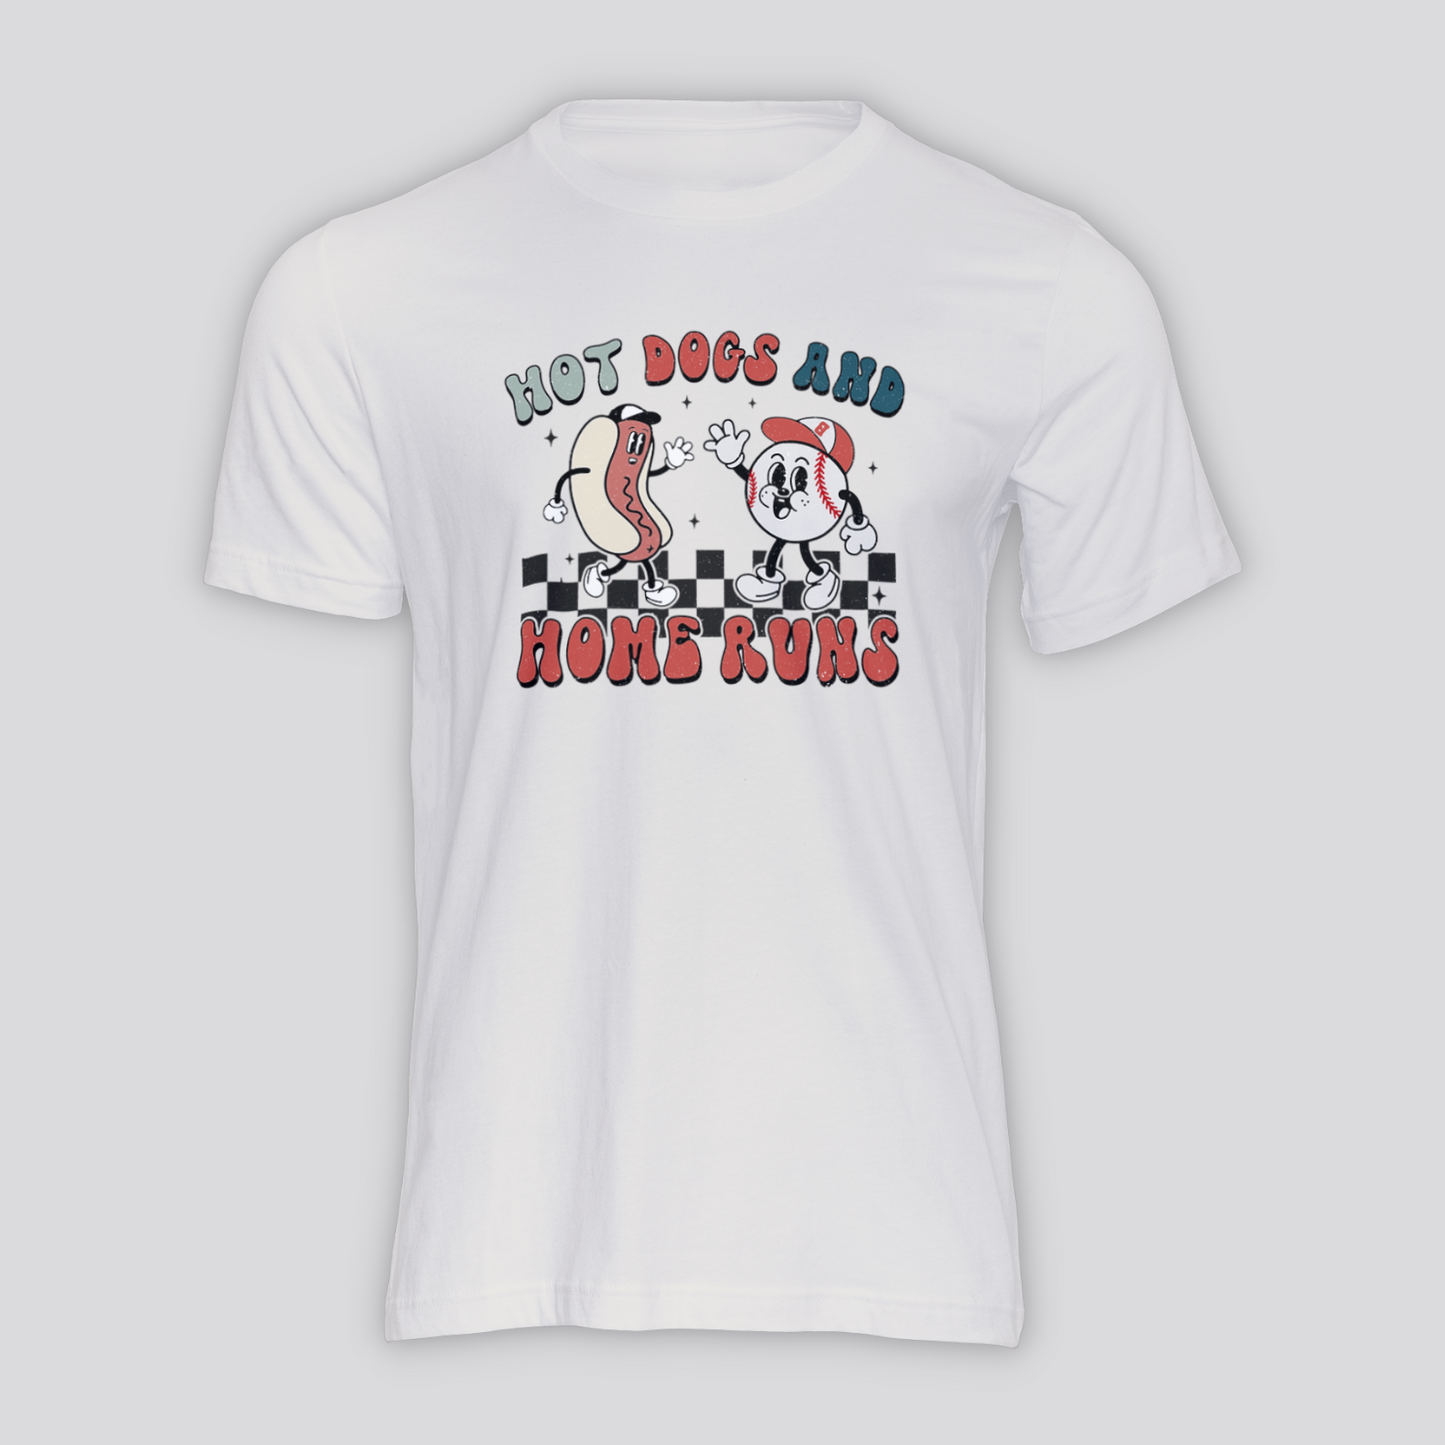 Hot Dogs and Home Runs - Shirt